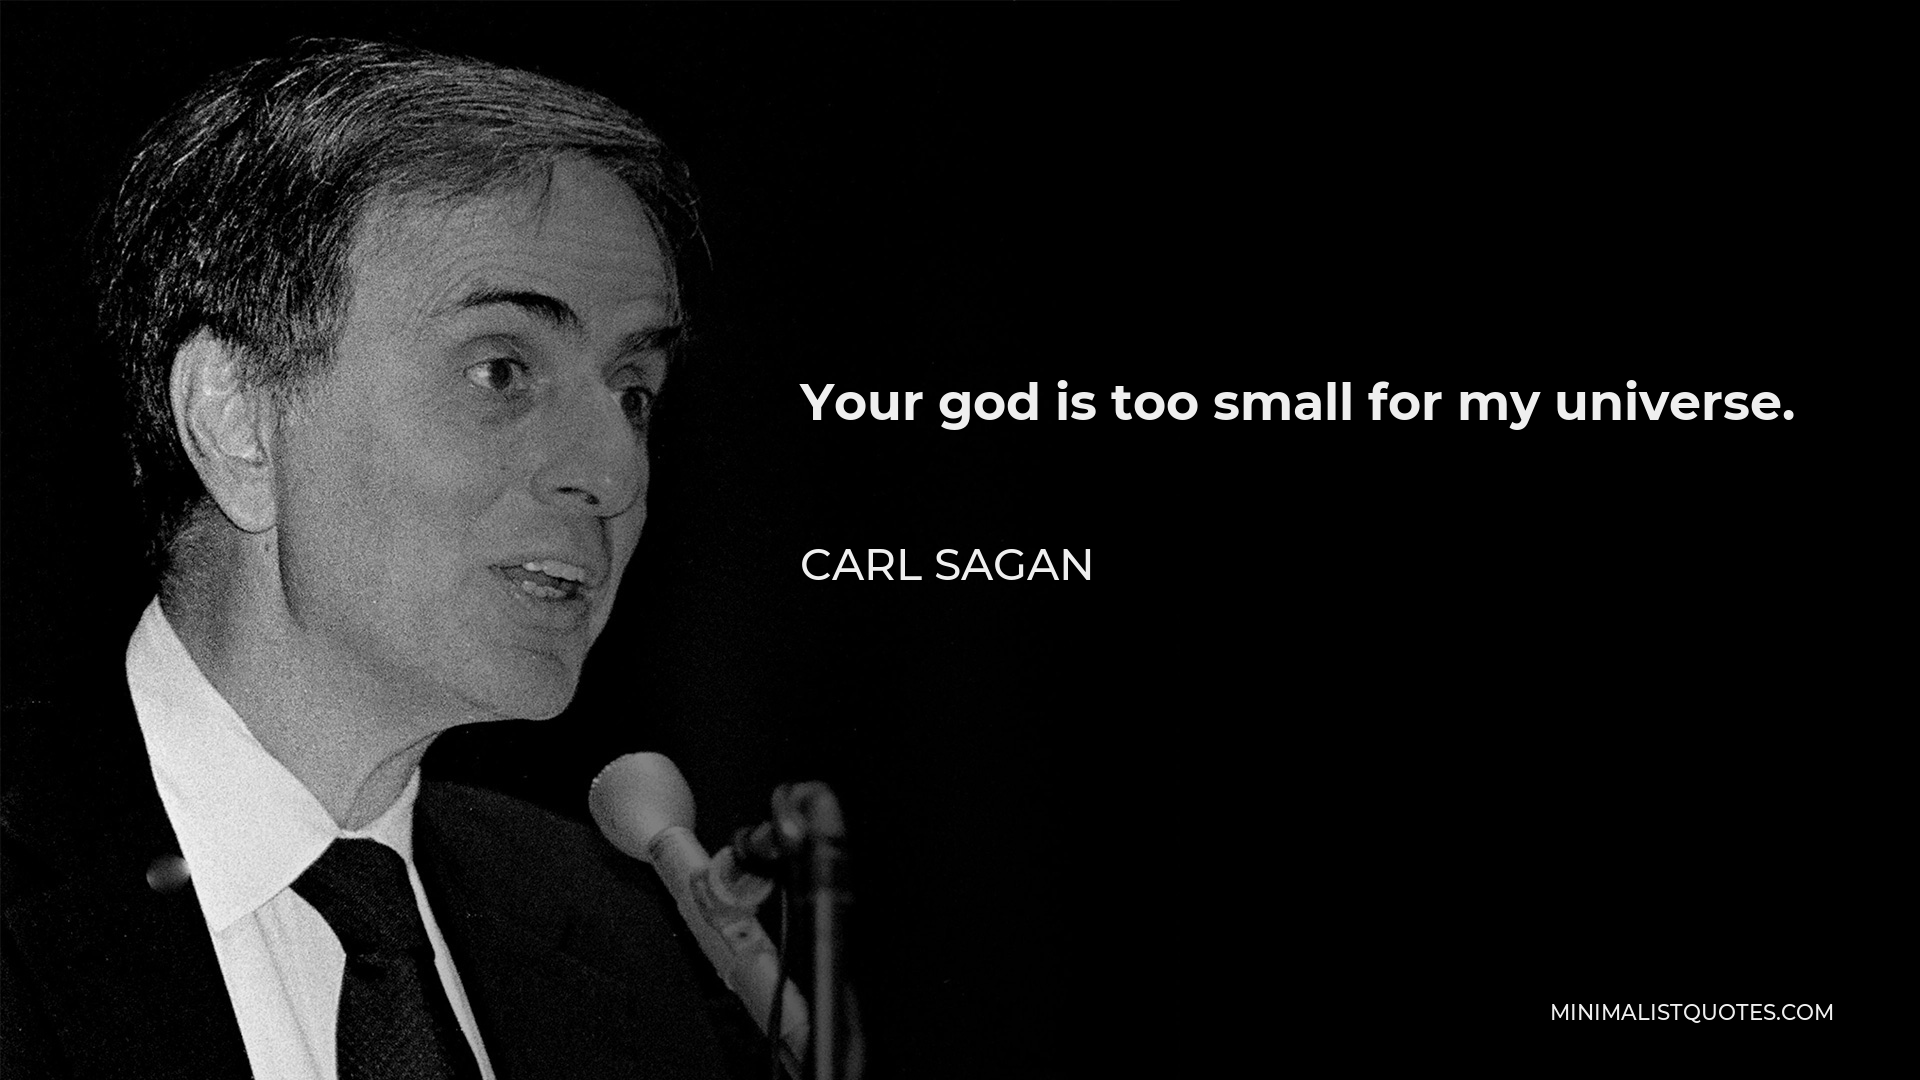 Carl Sagan Quote - Your god is too small for my universe.